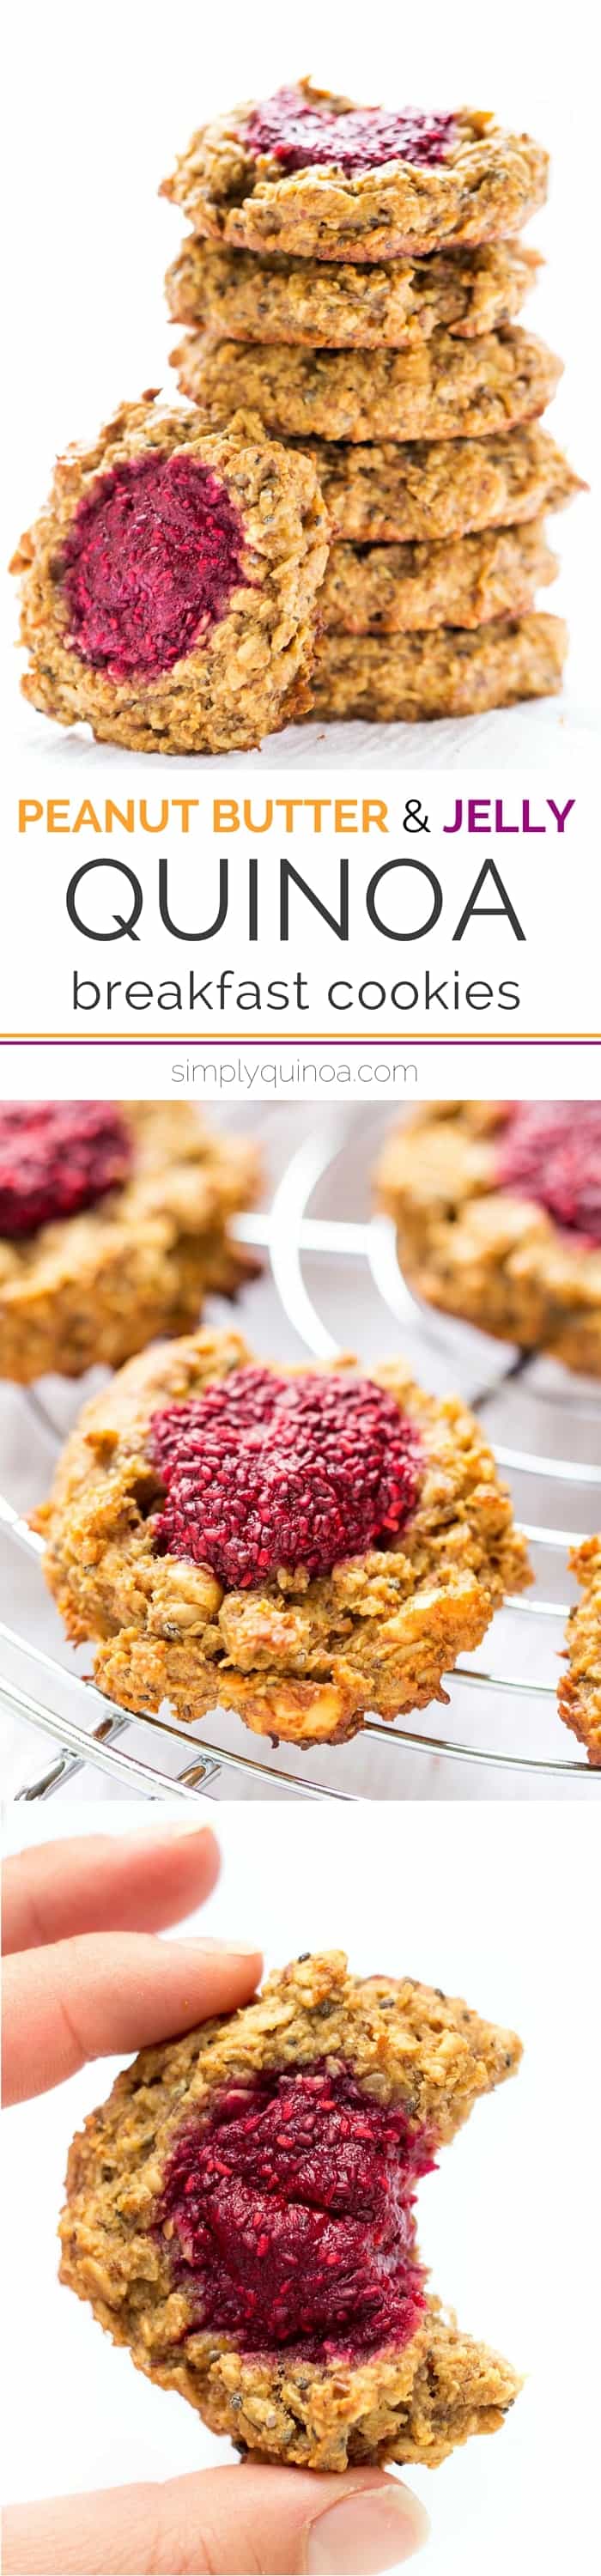 These QUINOA breakfast cookies are absolute perfection! A chewy peanut butter cookie base topped with healthy raspberry chia jam. [gluten-free + vegan]